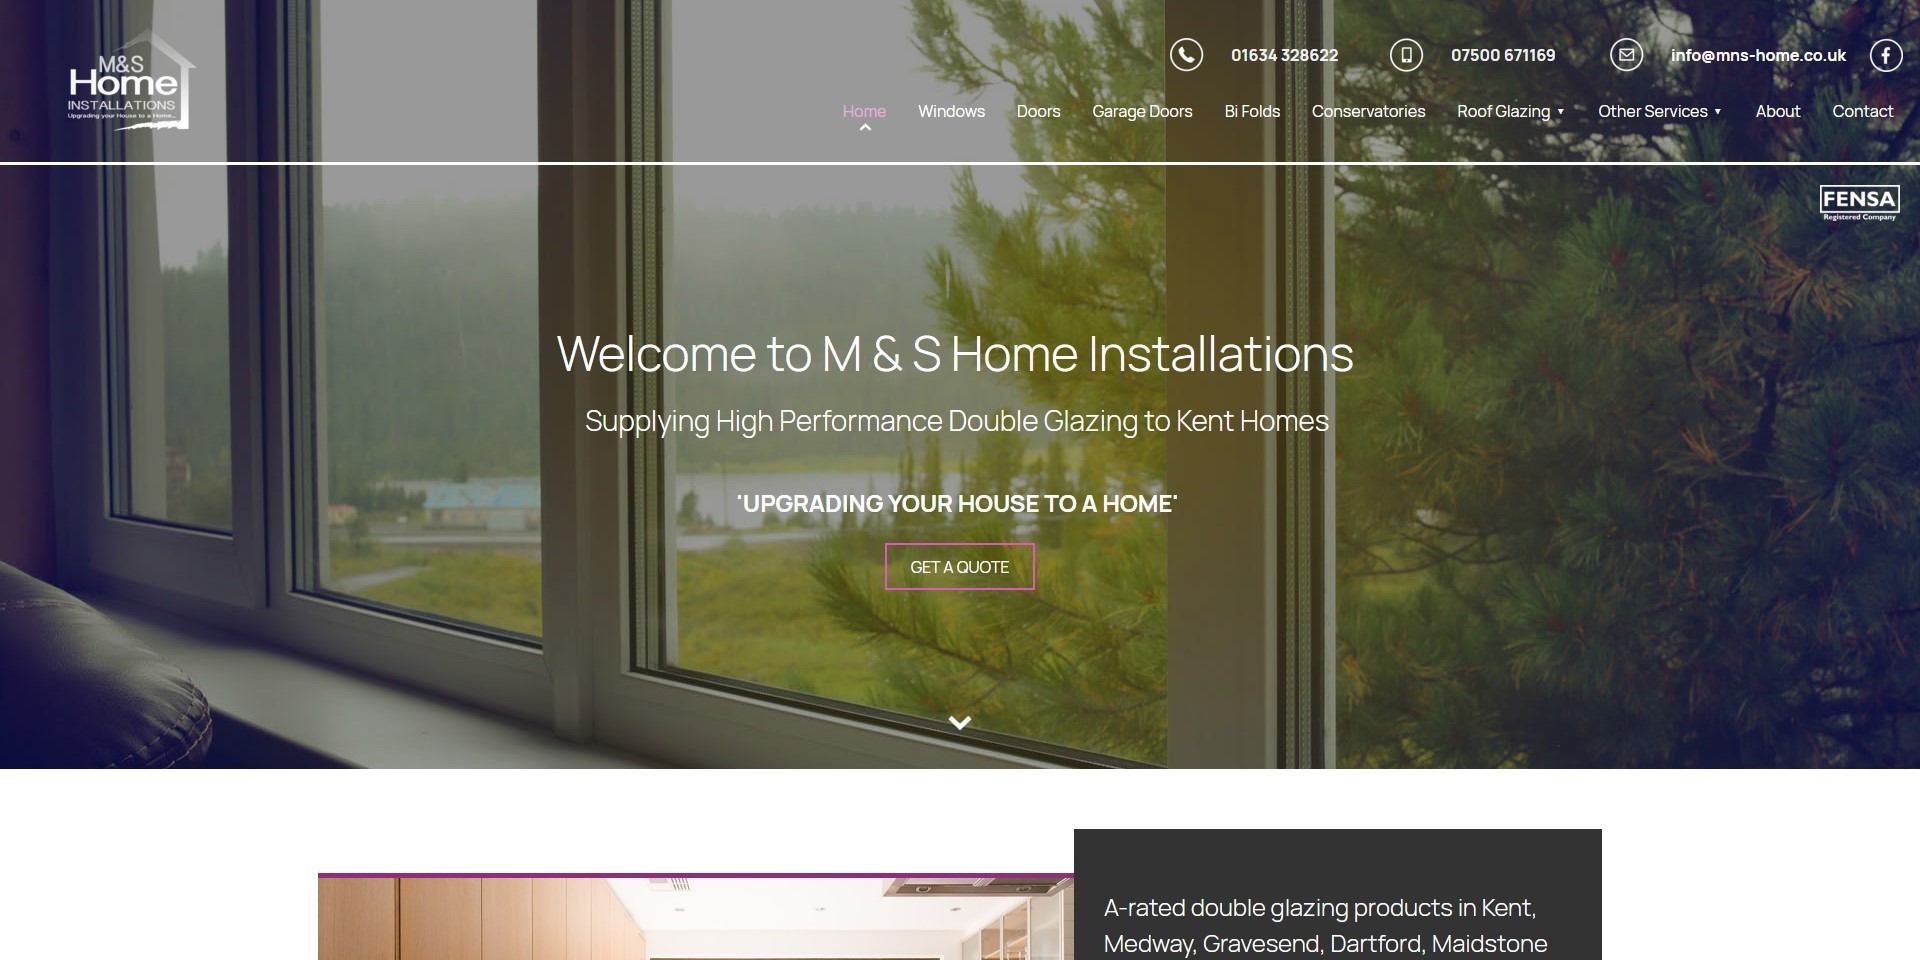 The new M&S Home Installations website, designed by it'seeze, shown on a desktop.